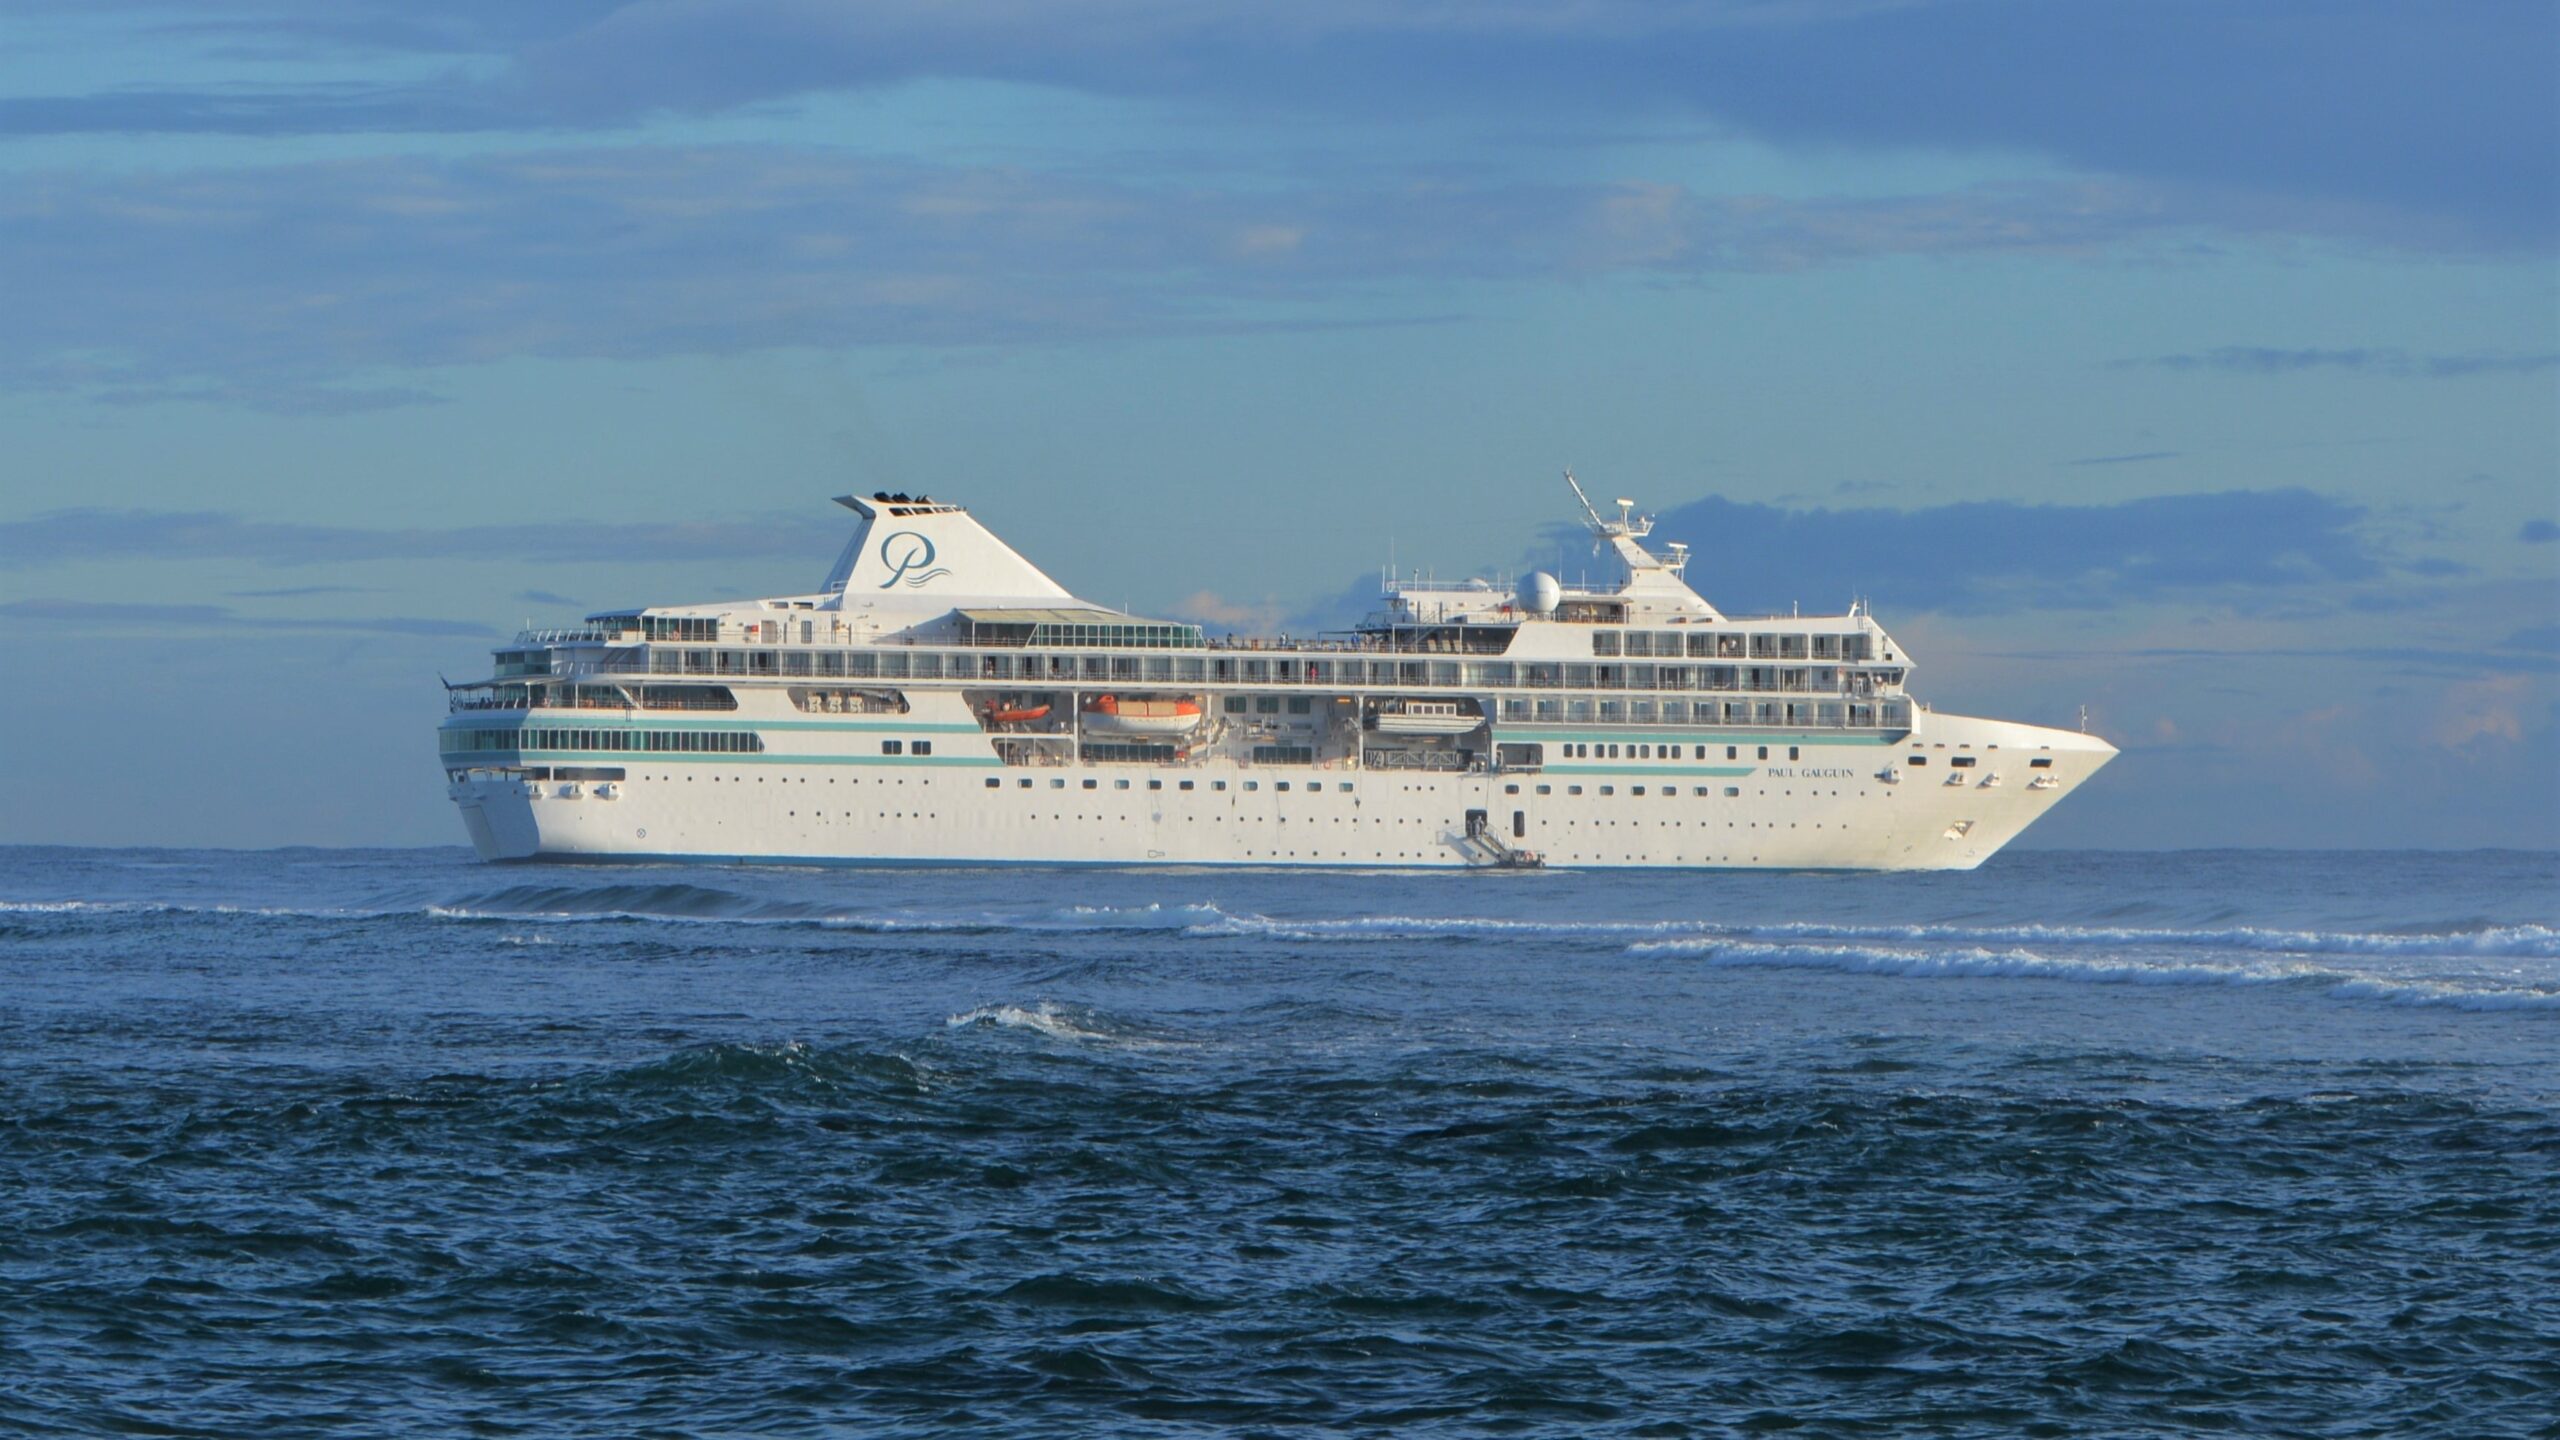 Cruise ships return to Cook Islands